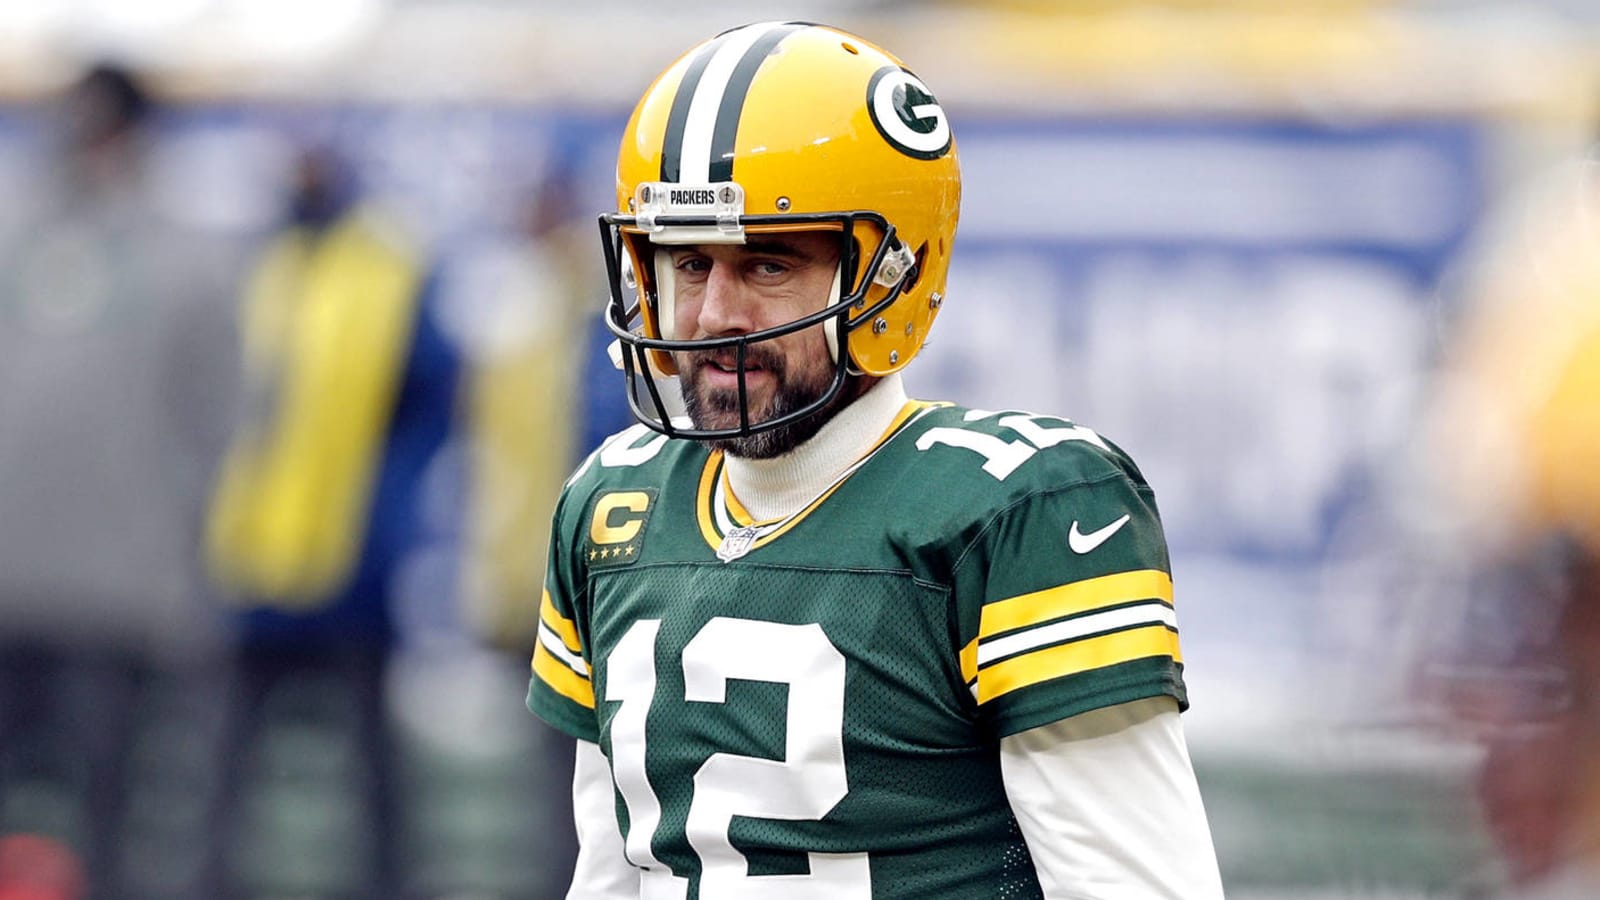 Packers GM: Rodgers 'our QB for the foreseeable future'